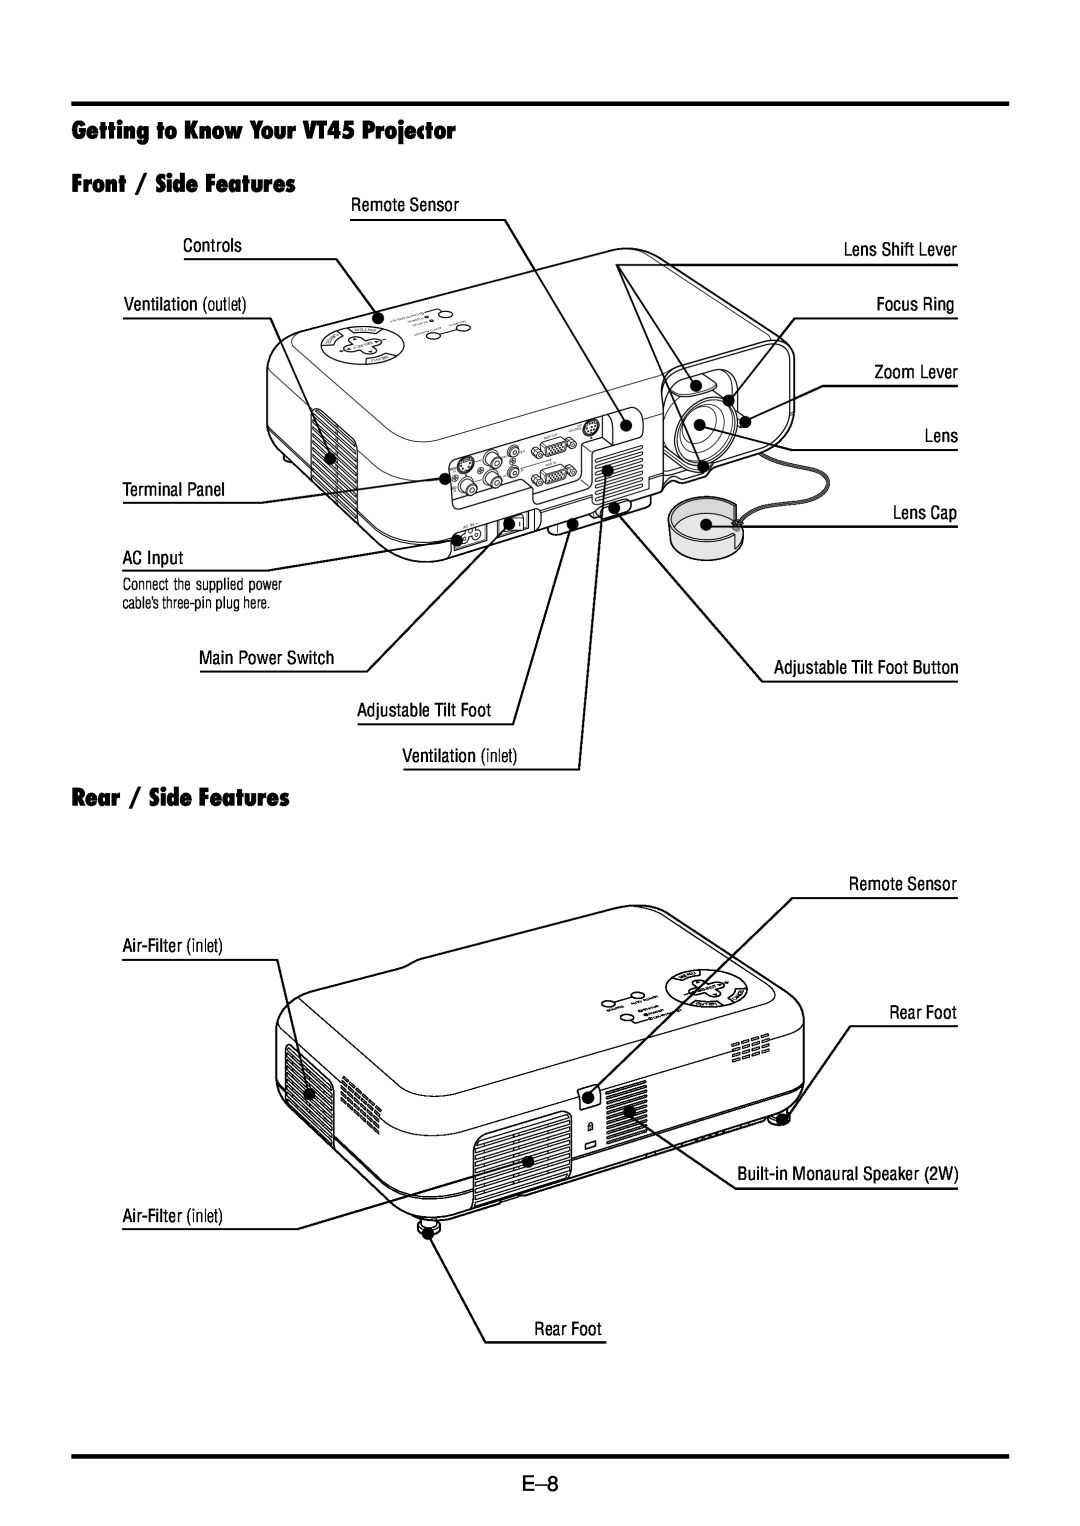 NEC user manual Getting to Know Your VT45 Projector, Front / Side Features, Rear / Side Features 